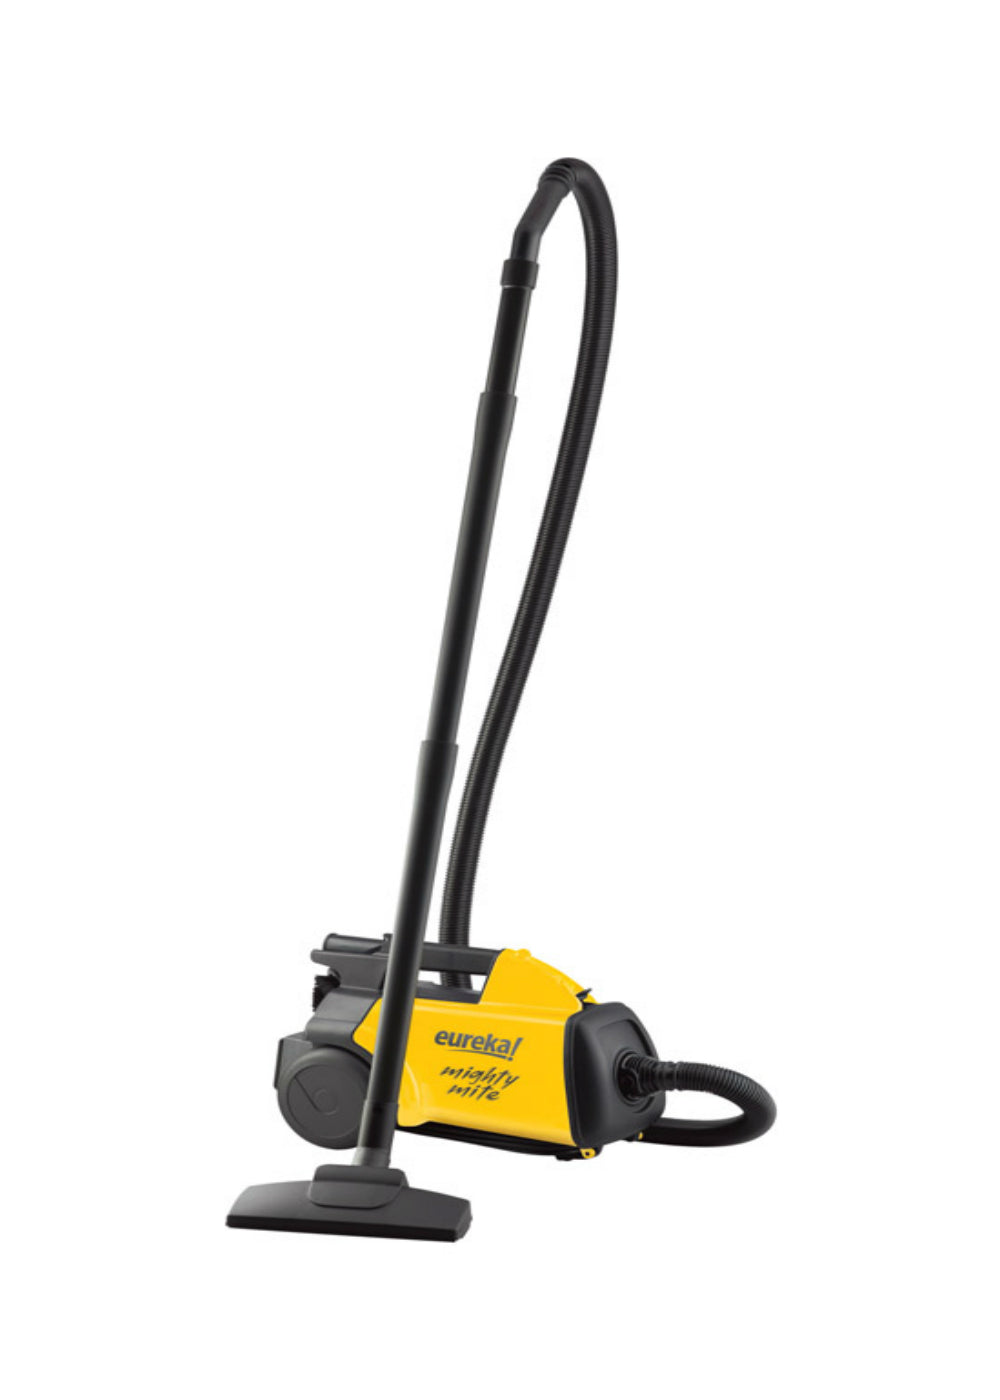 buy vacuums & floor equipment at cheap rate in bulk. wholesale & retail small home appliances repair kits store.